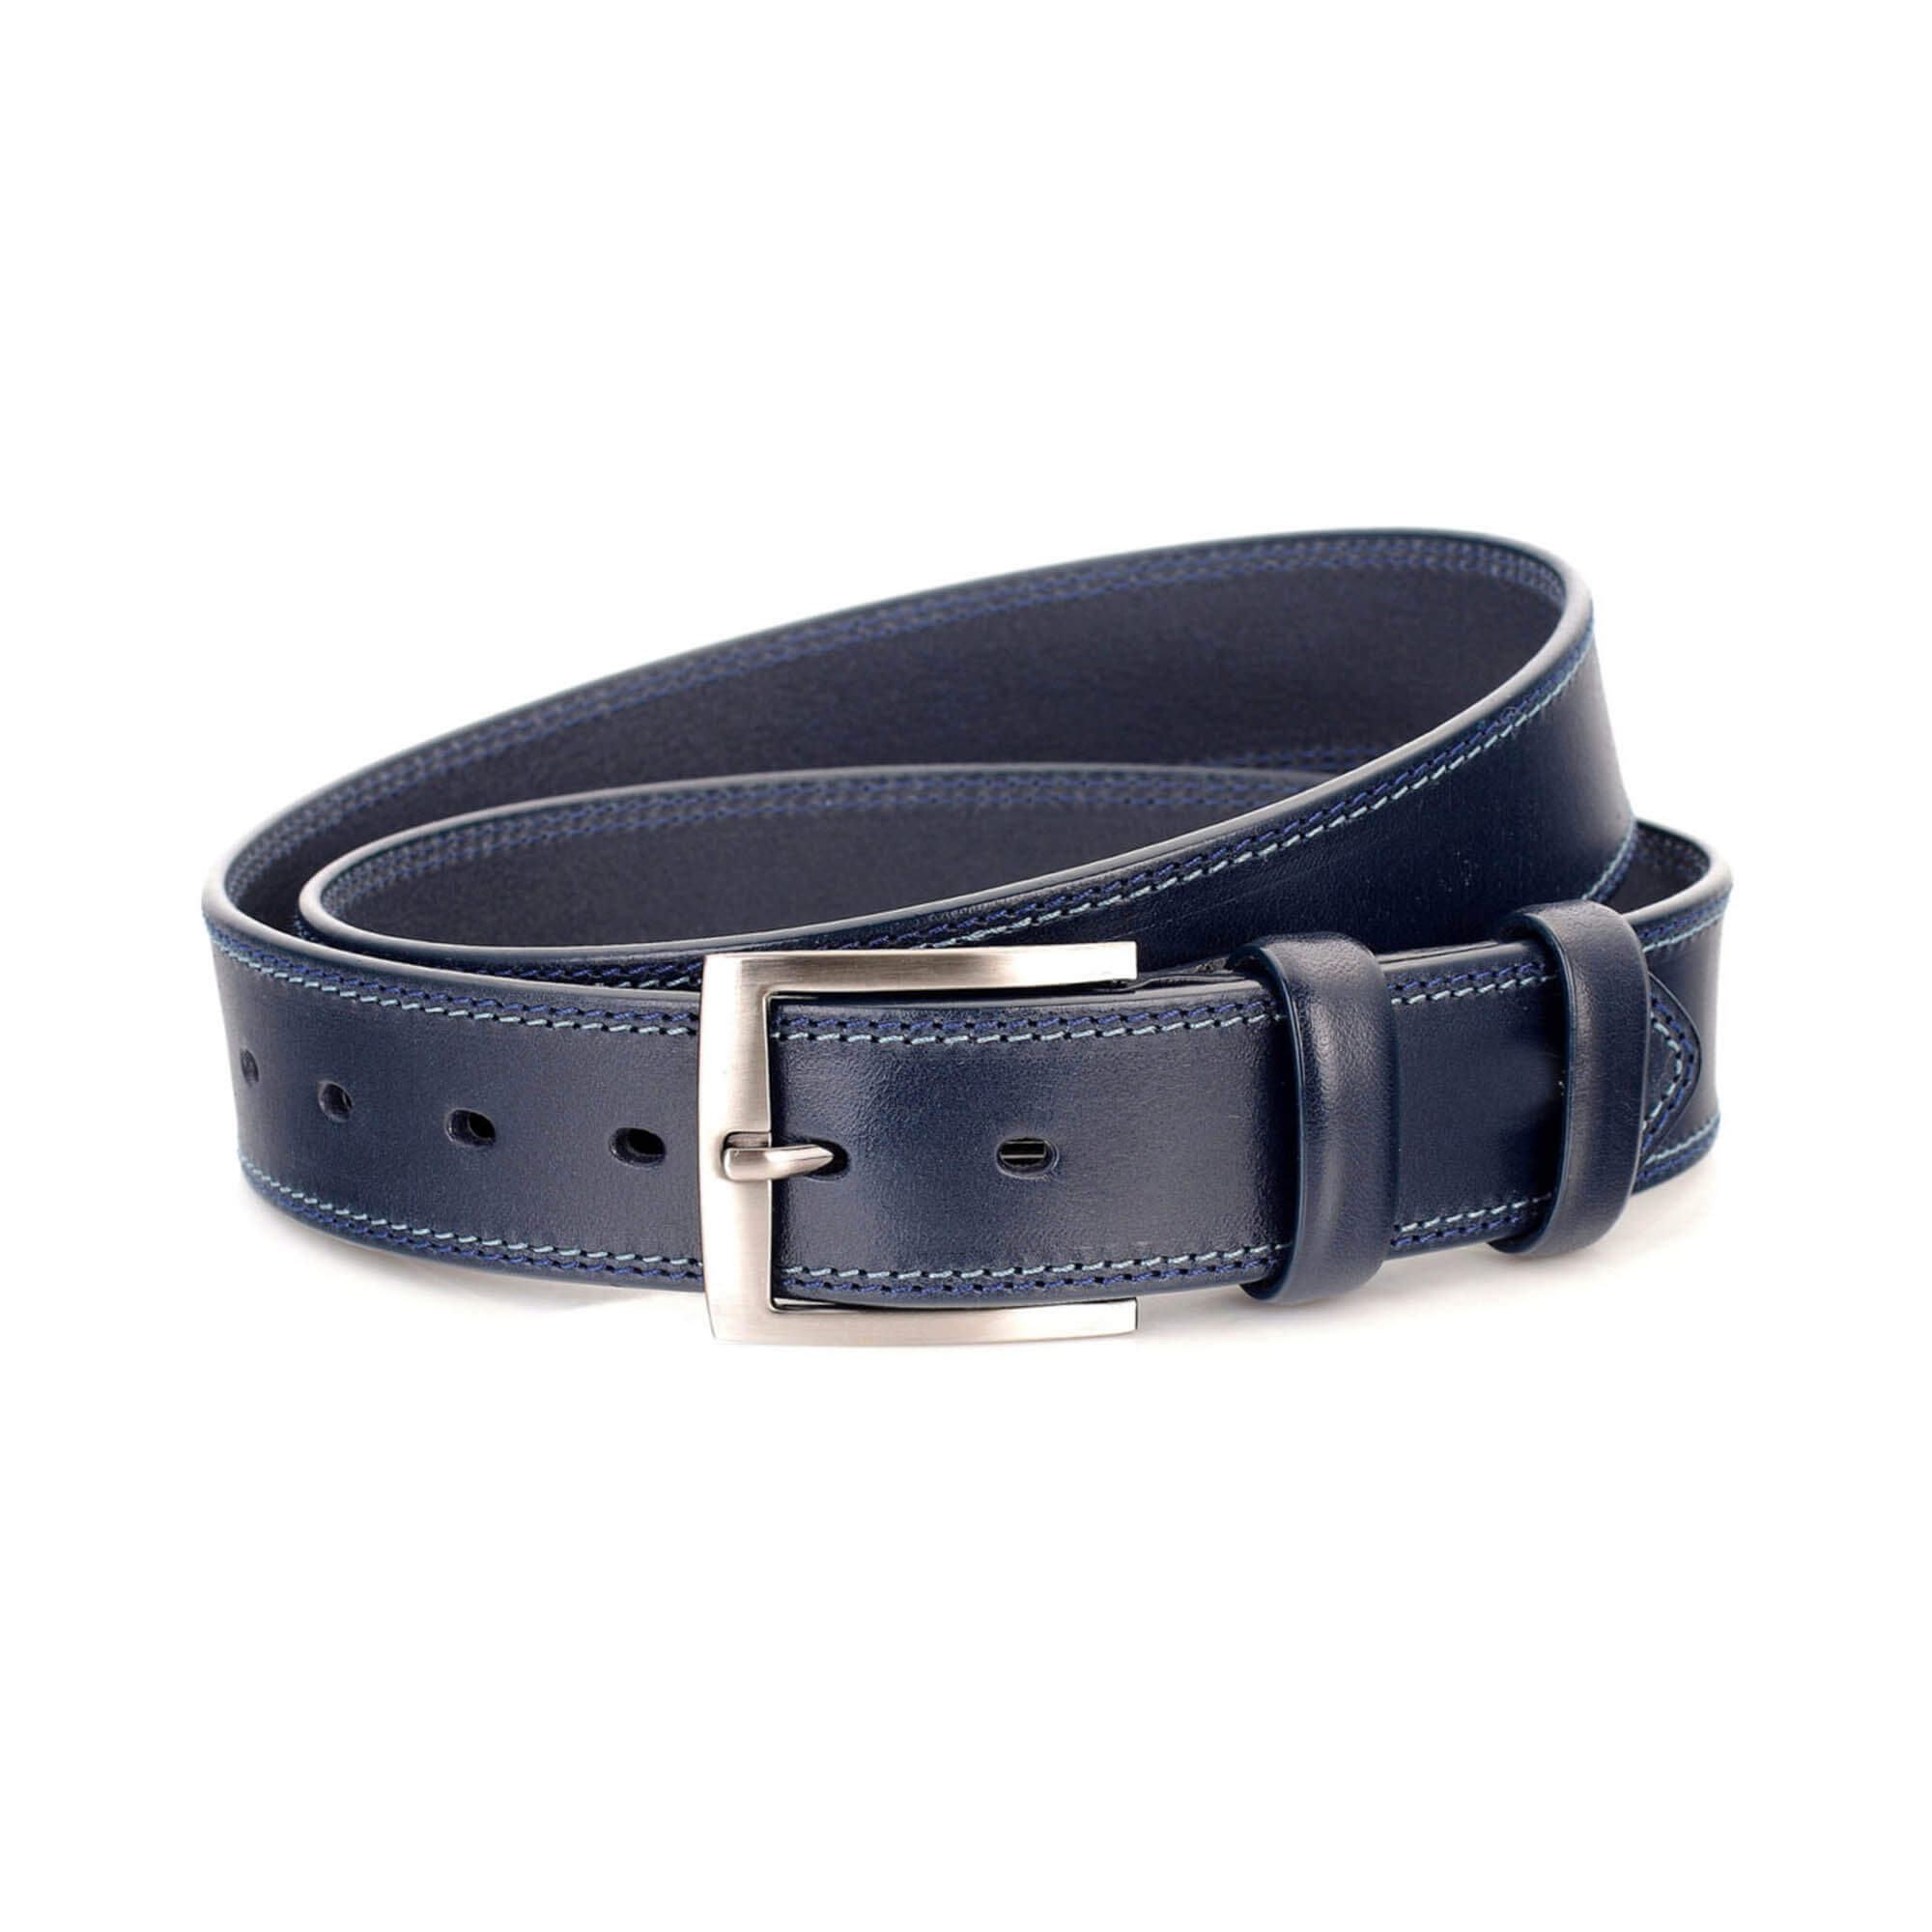 Buy Dark Blue Casual Mens Belt For Jeans - Wide Thick Leather